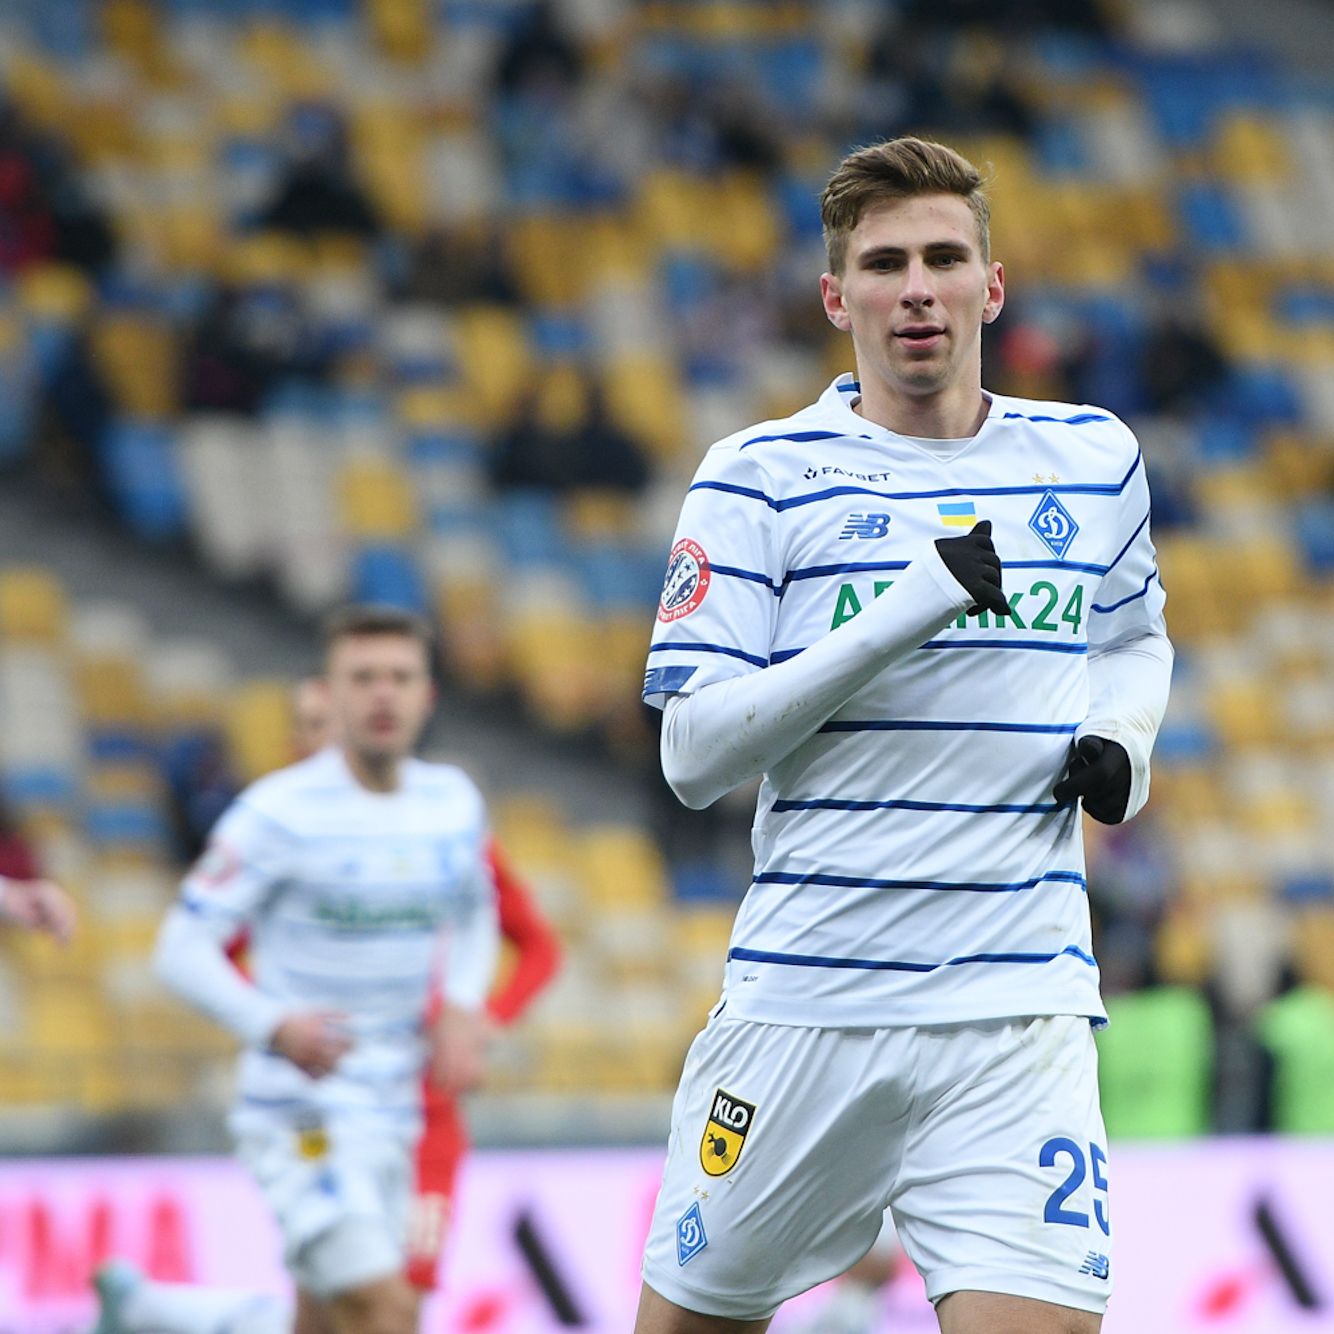 Illia Zabarnyi: “We changed our play and scored in the second half”